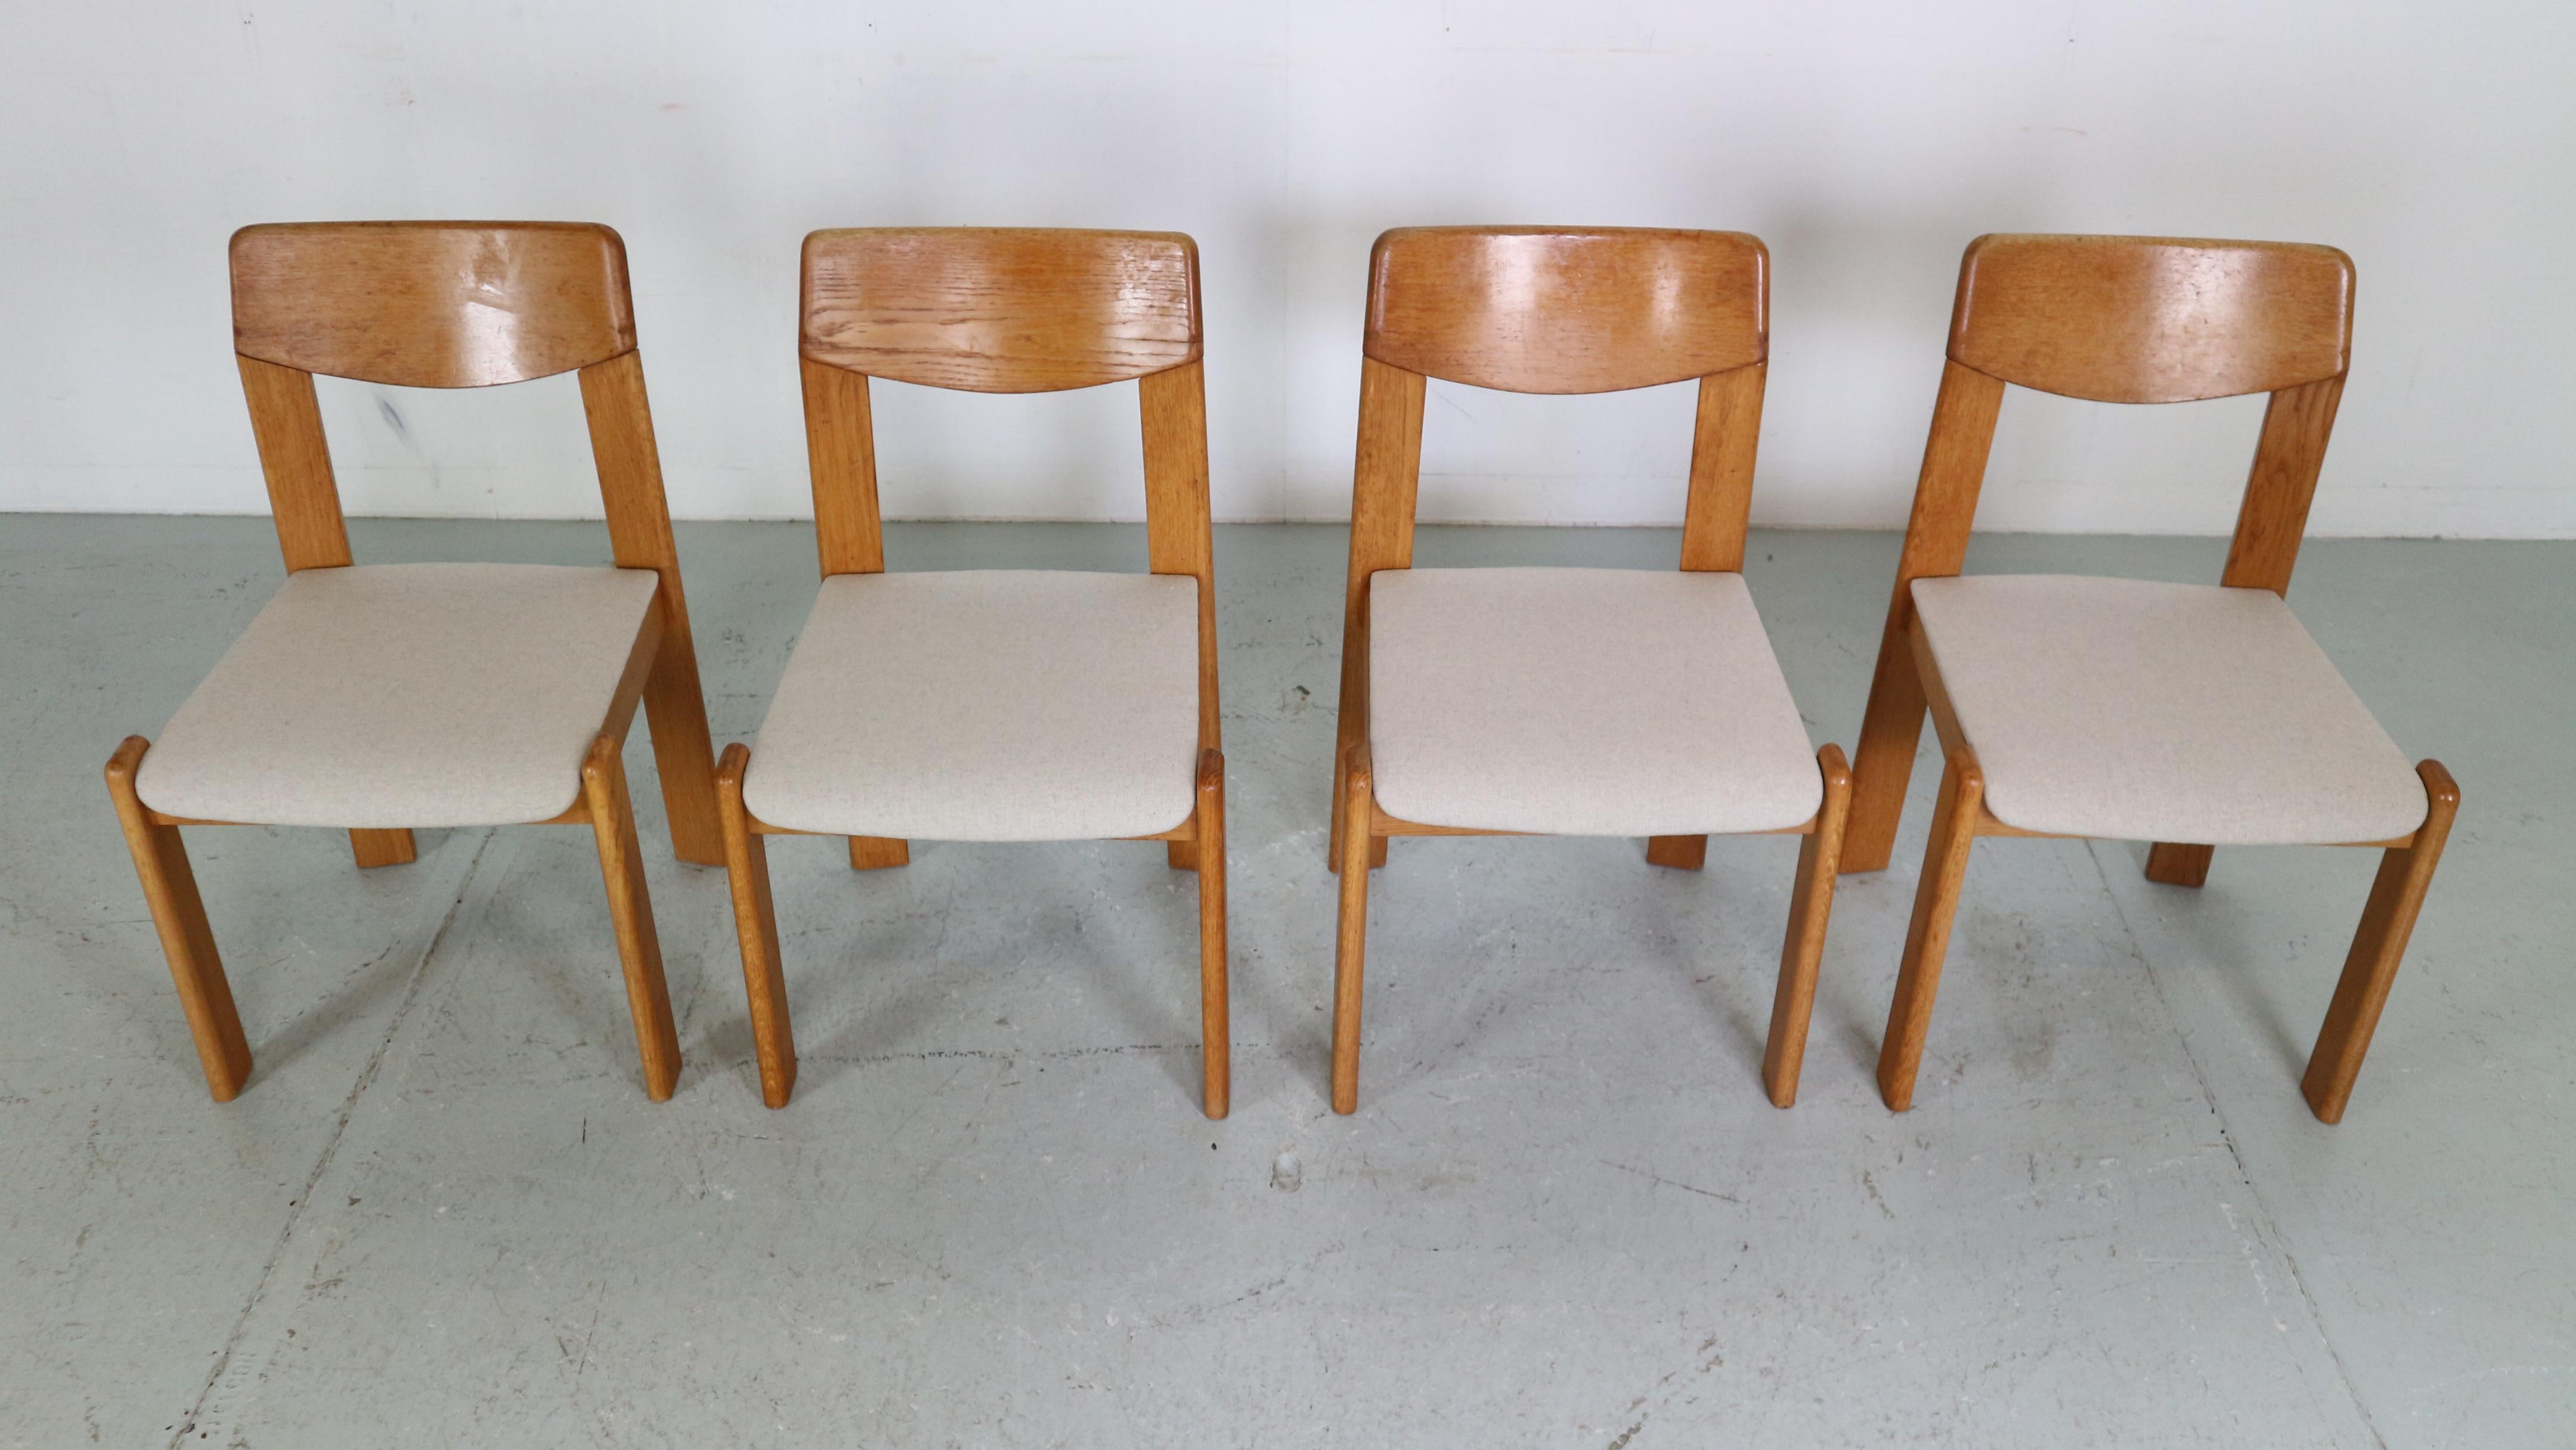 Scandinavian Modern Set of 4 Sculpture Oak Dinning Room Chairs, 1960 Denmark In Good Condition For Sale In The Hague, NL